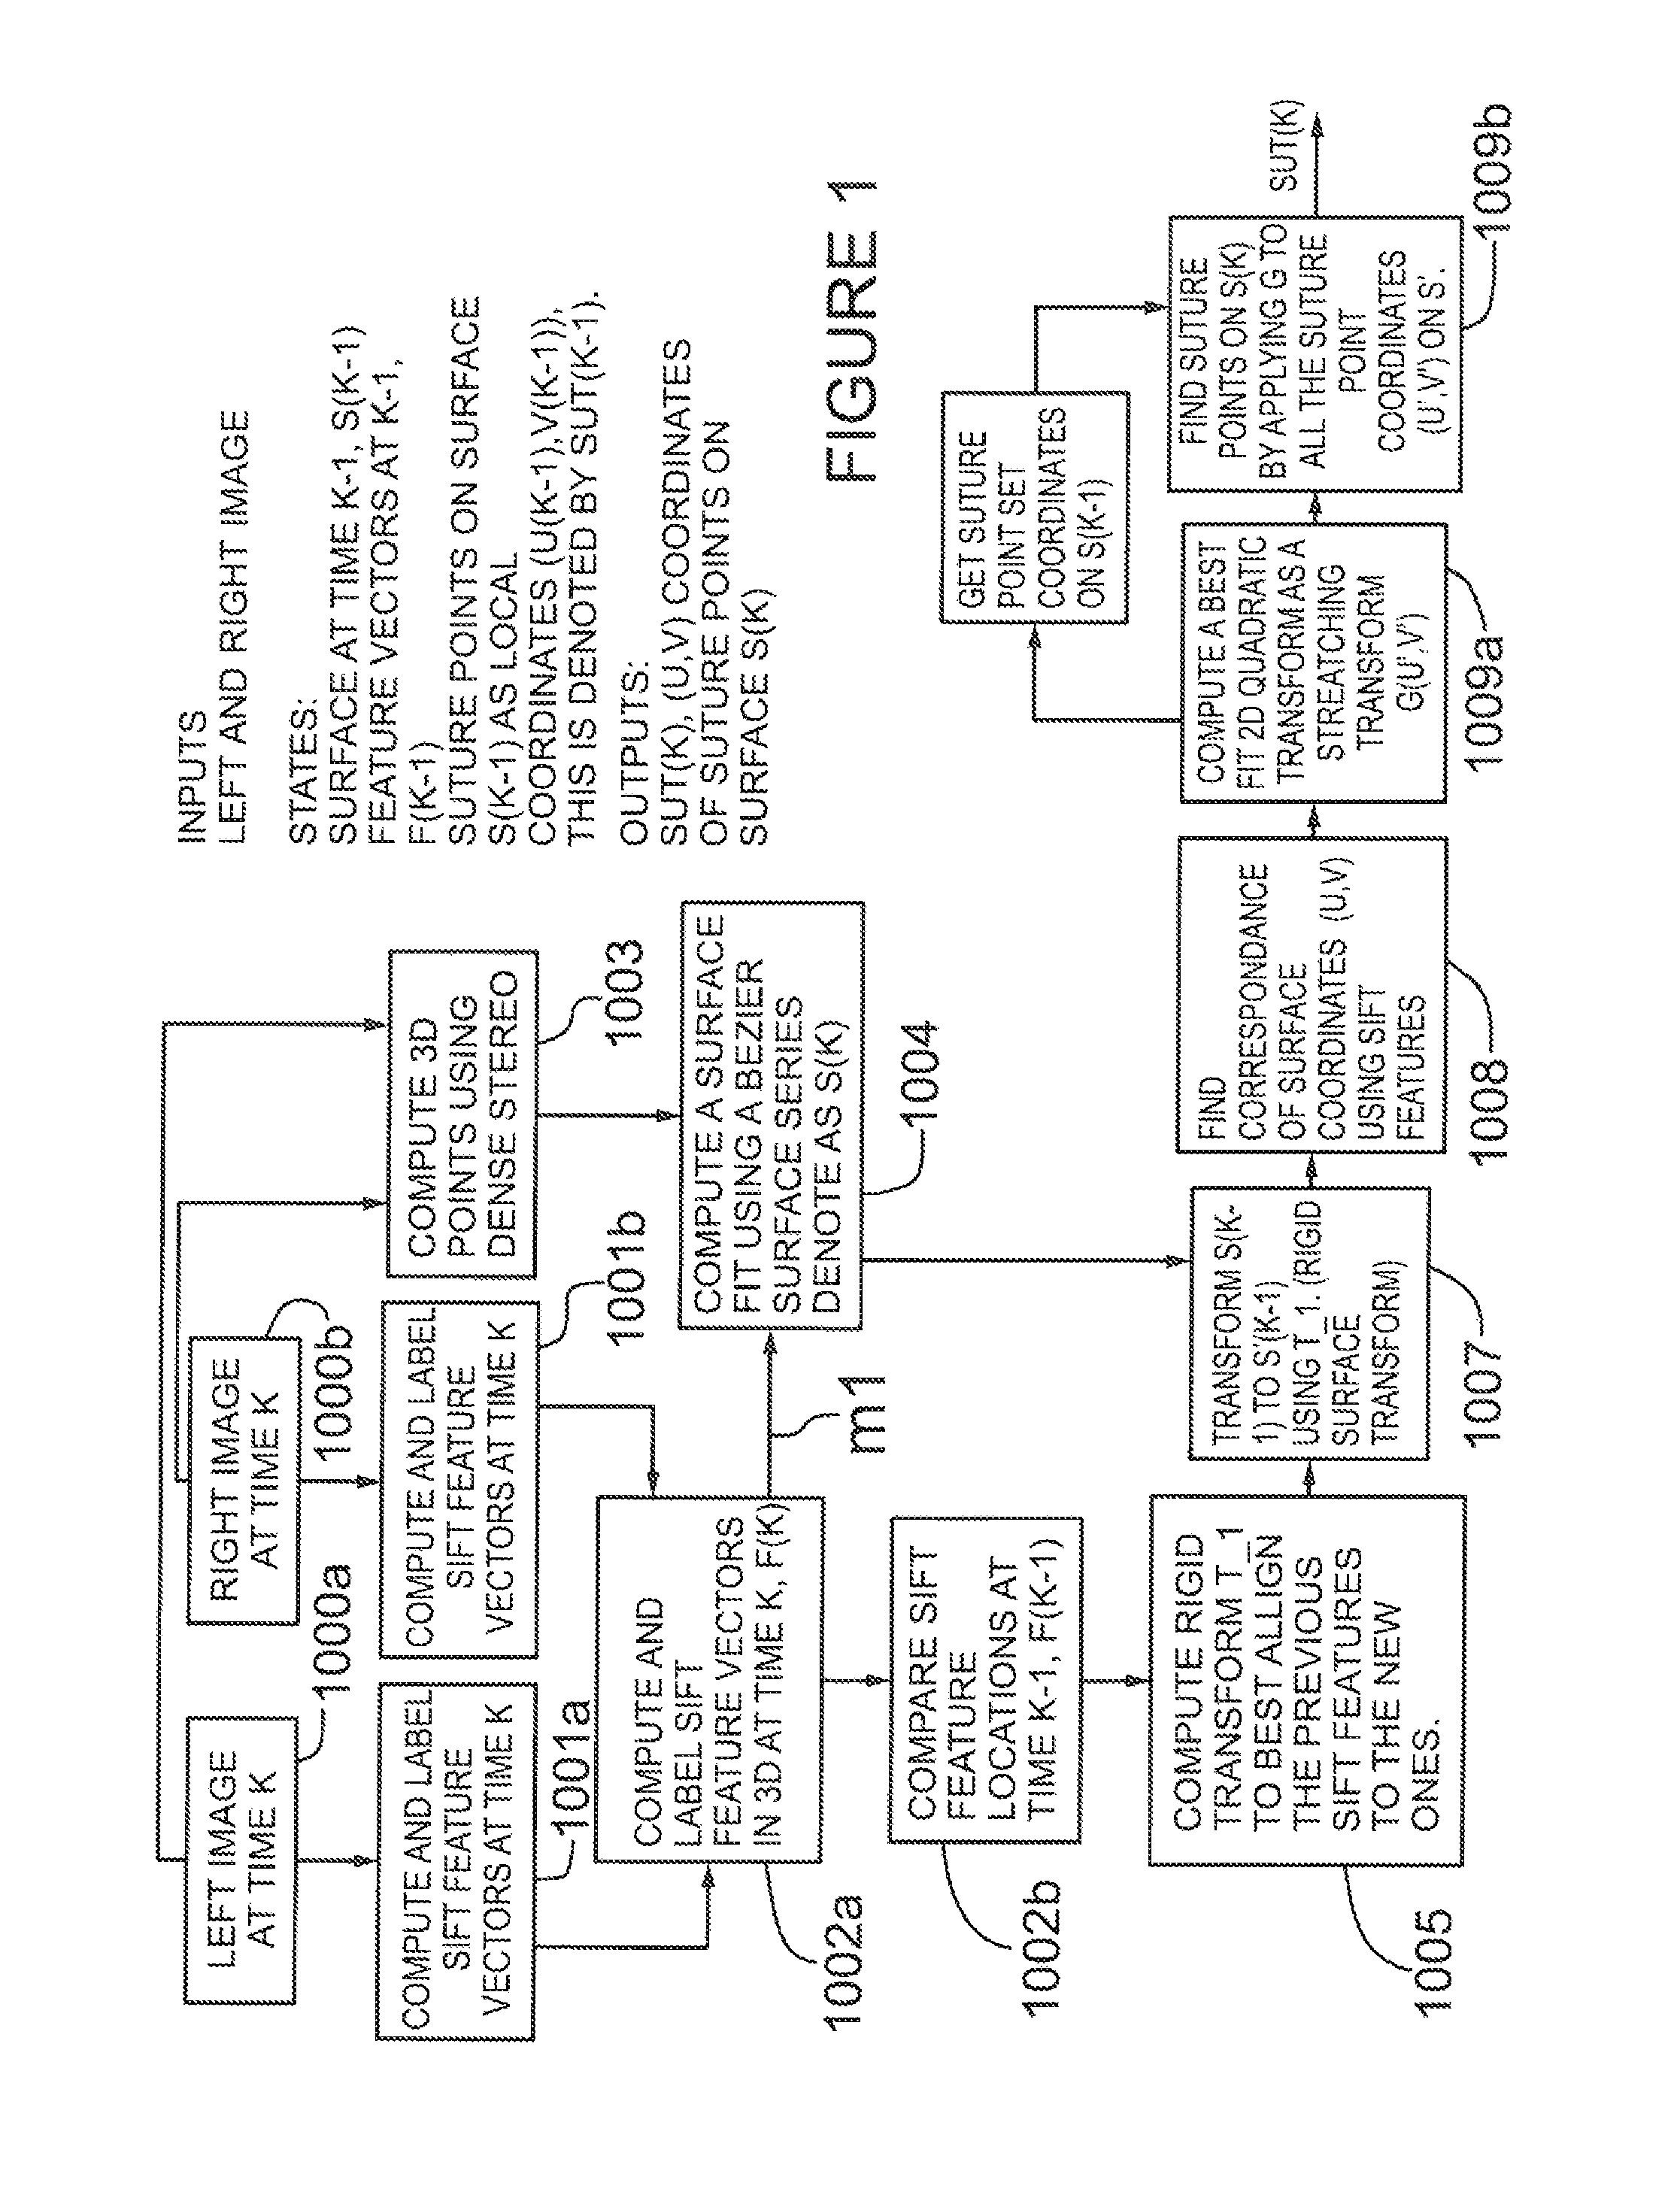 Method of real-time tracking of moving/flexible surfaces